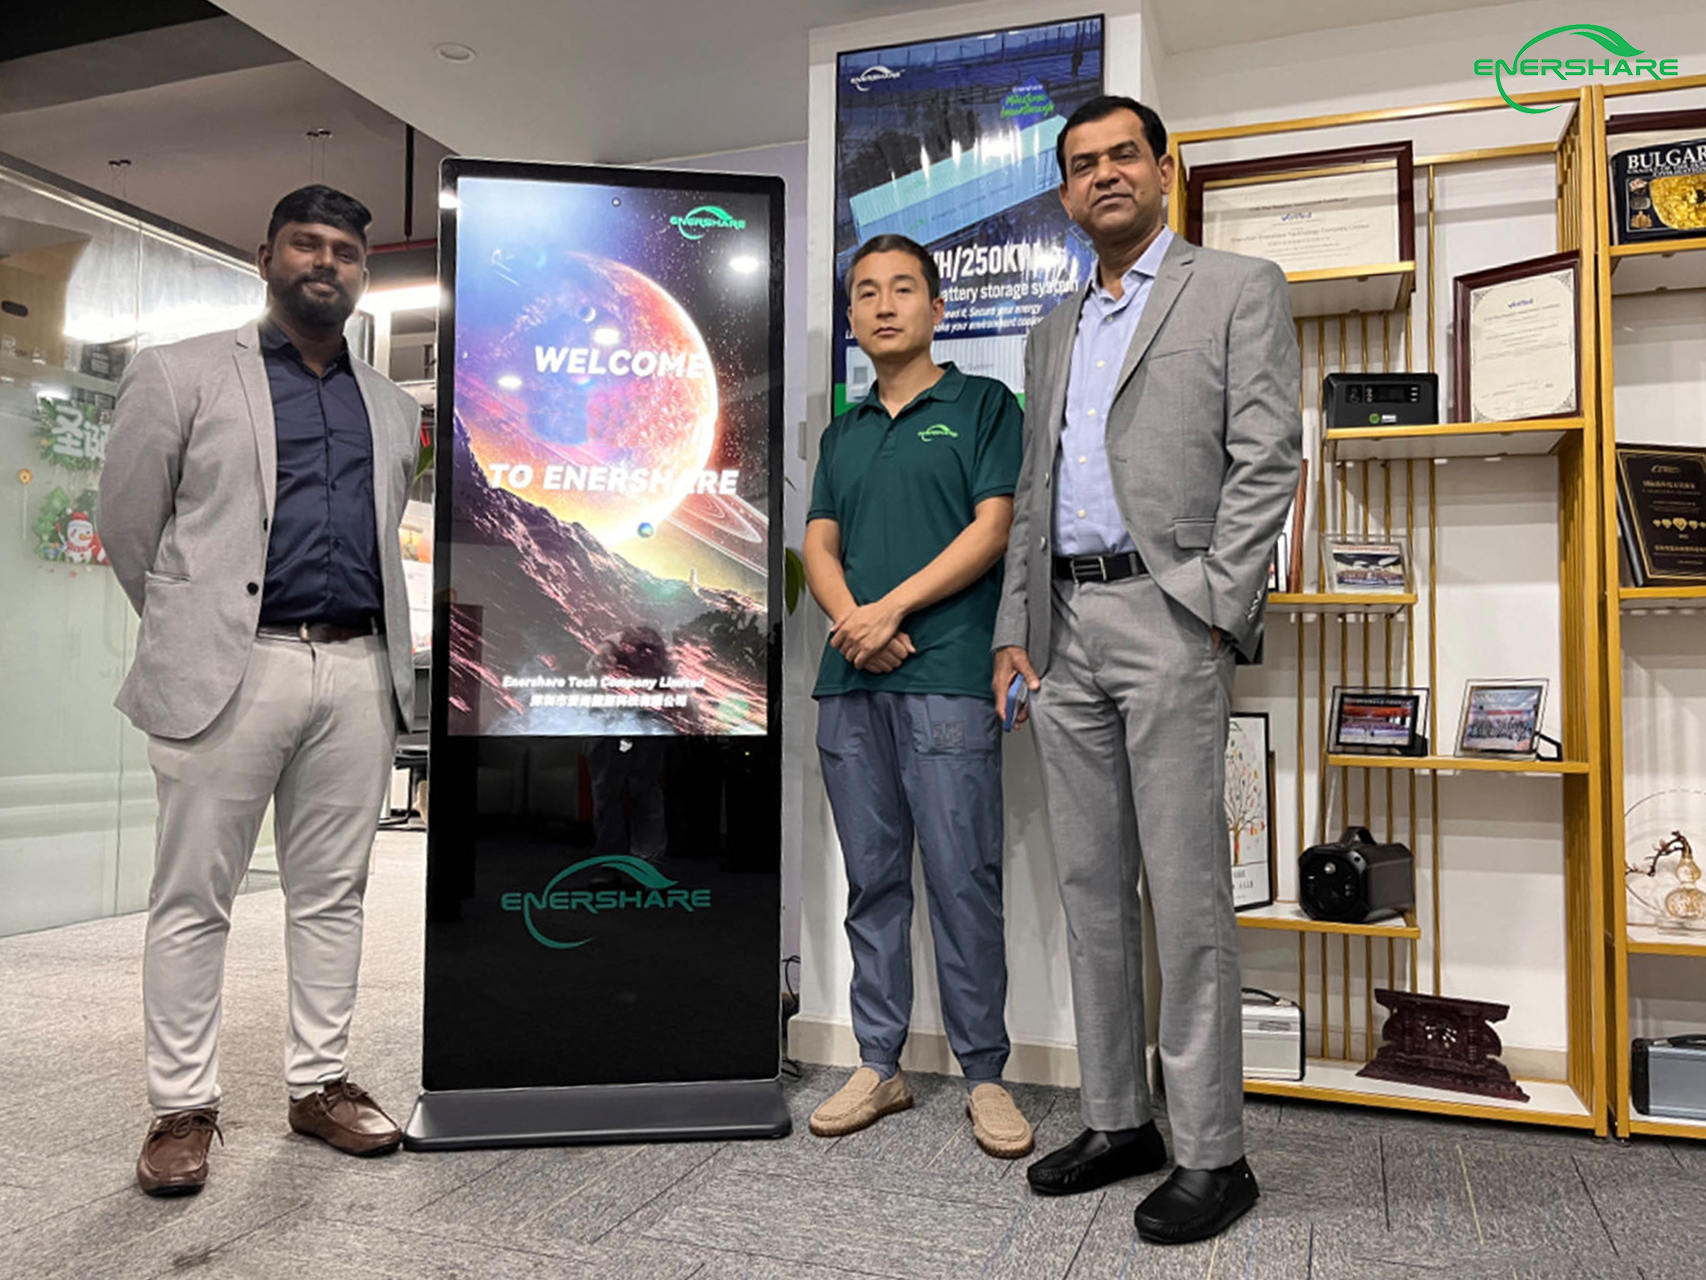 Enershare warmly welcomes India customers to visit our company!